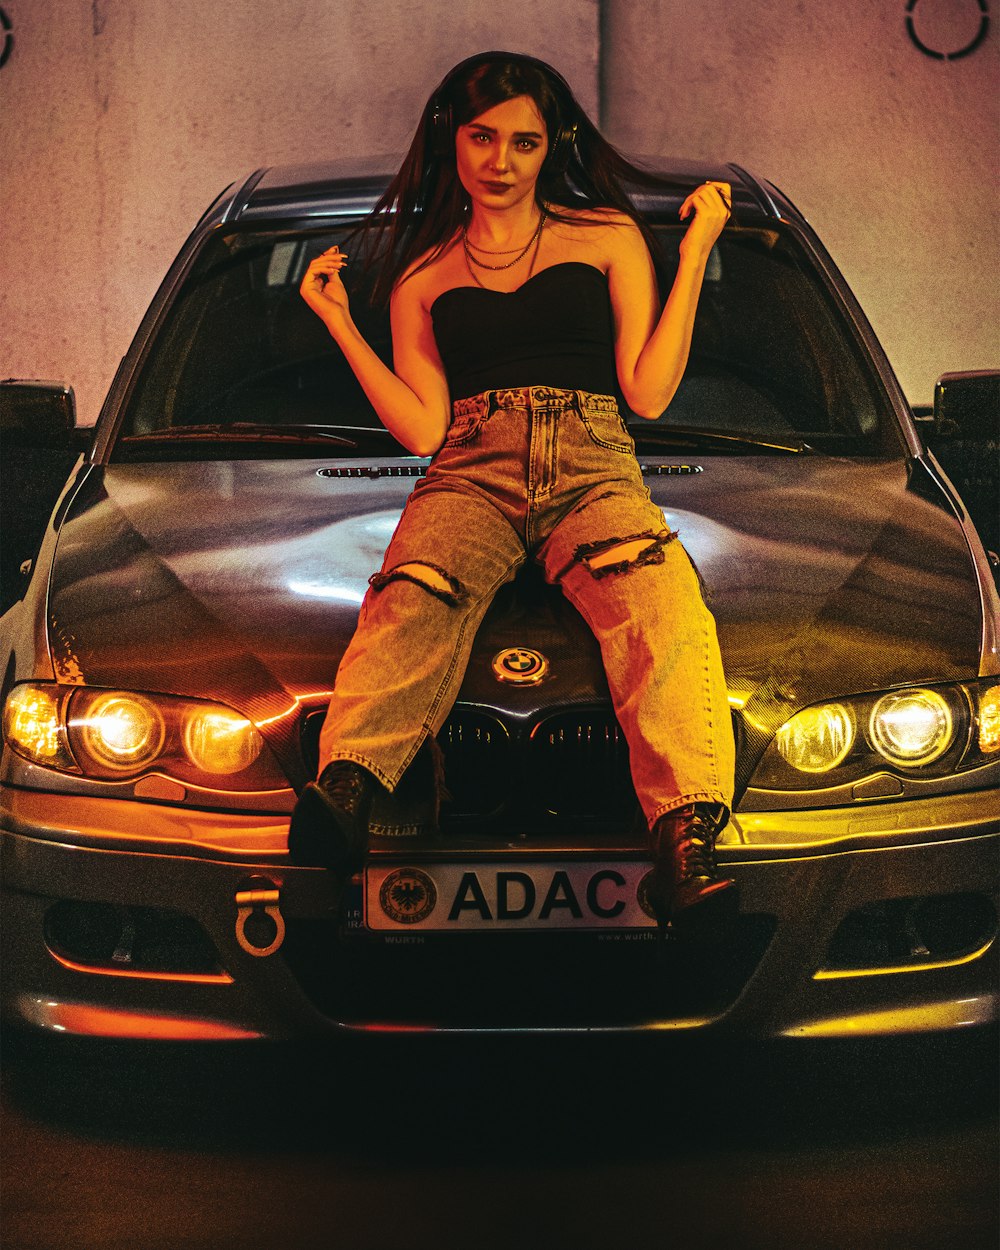 a woman sitting on the hood of a car